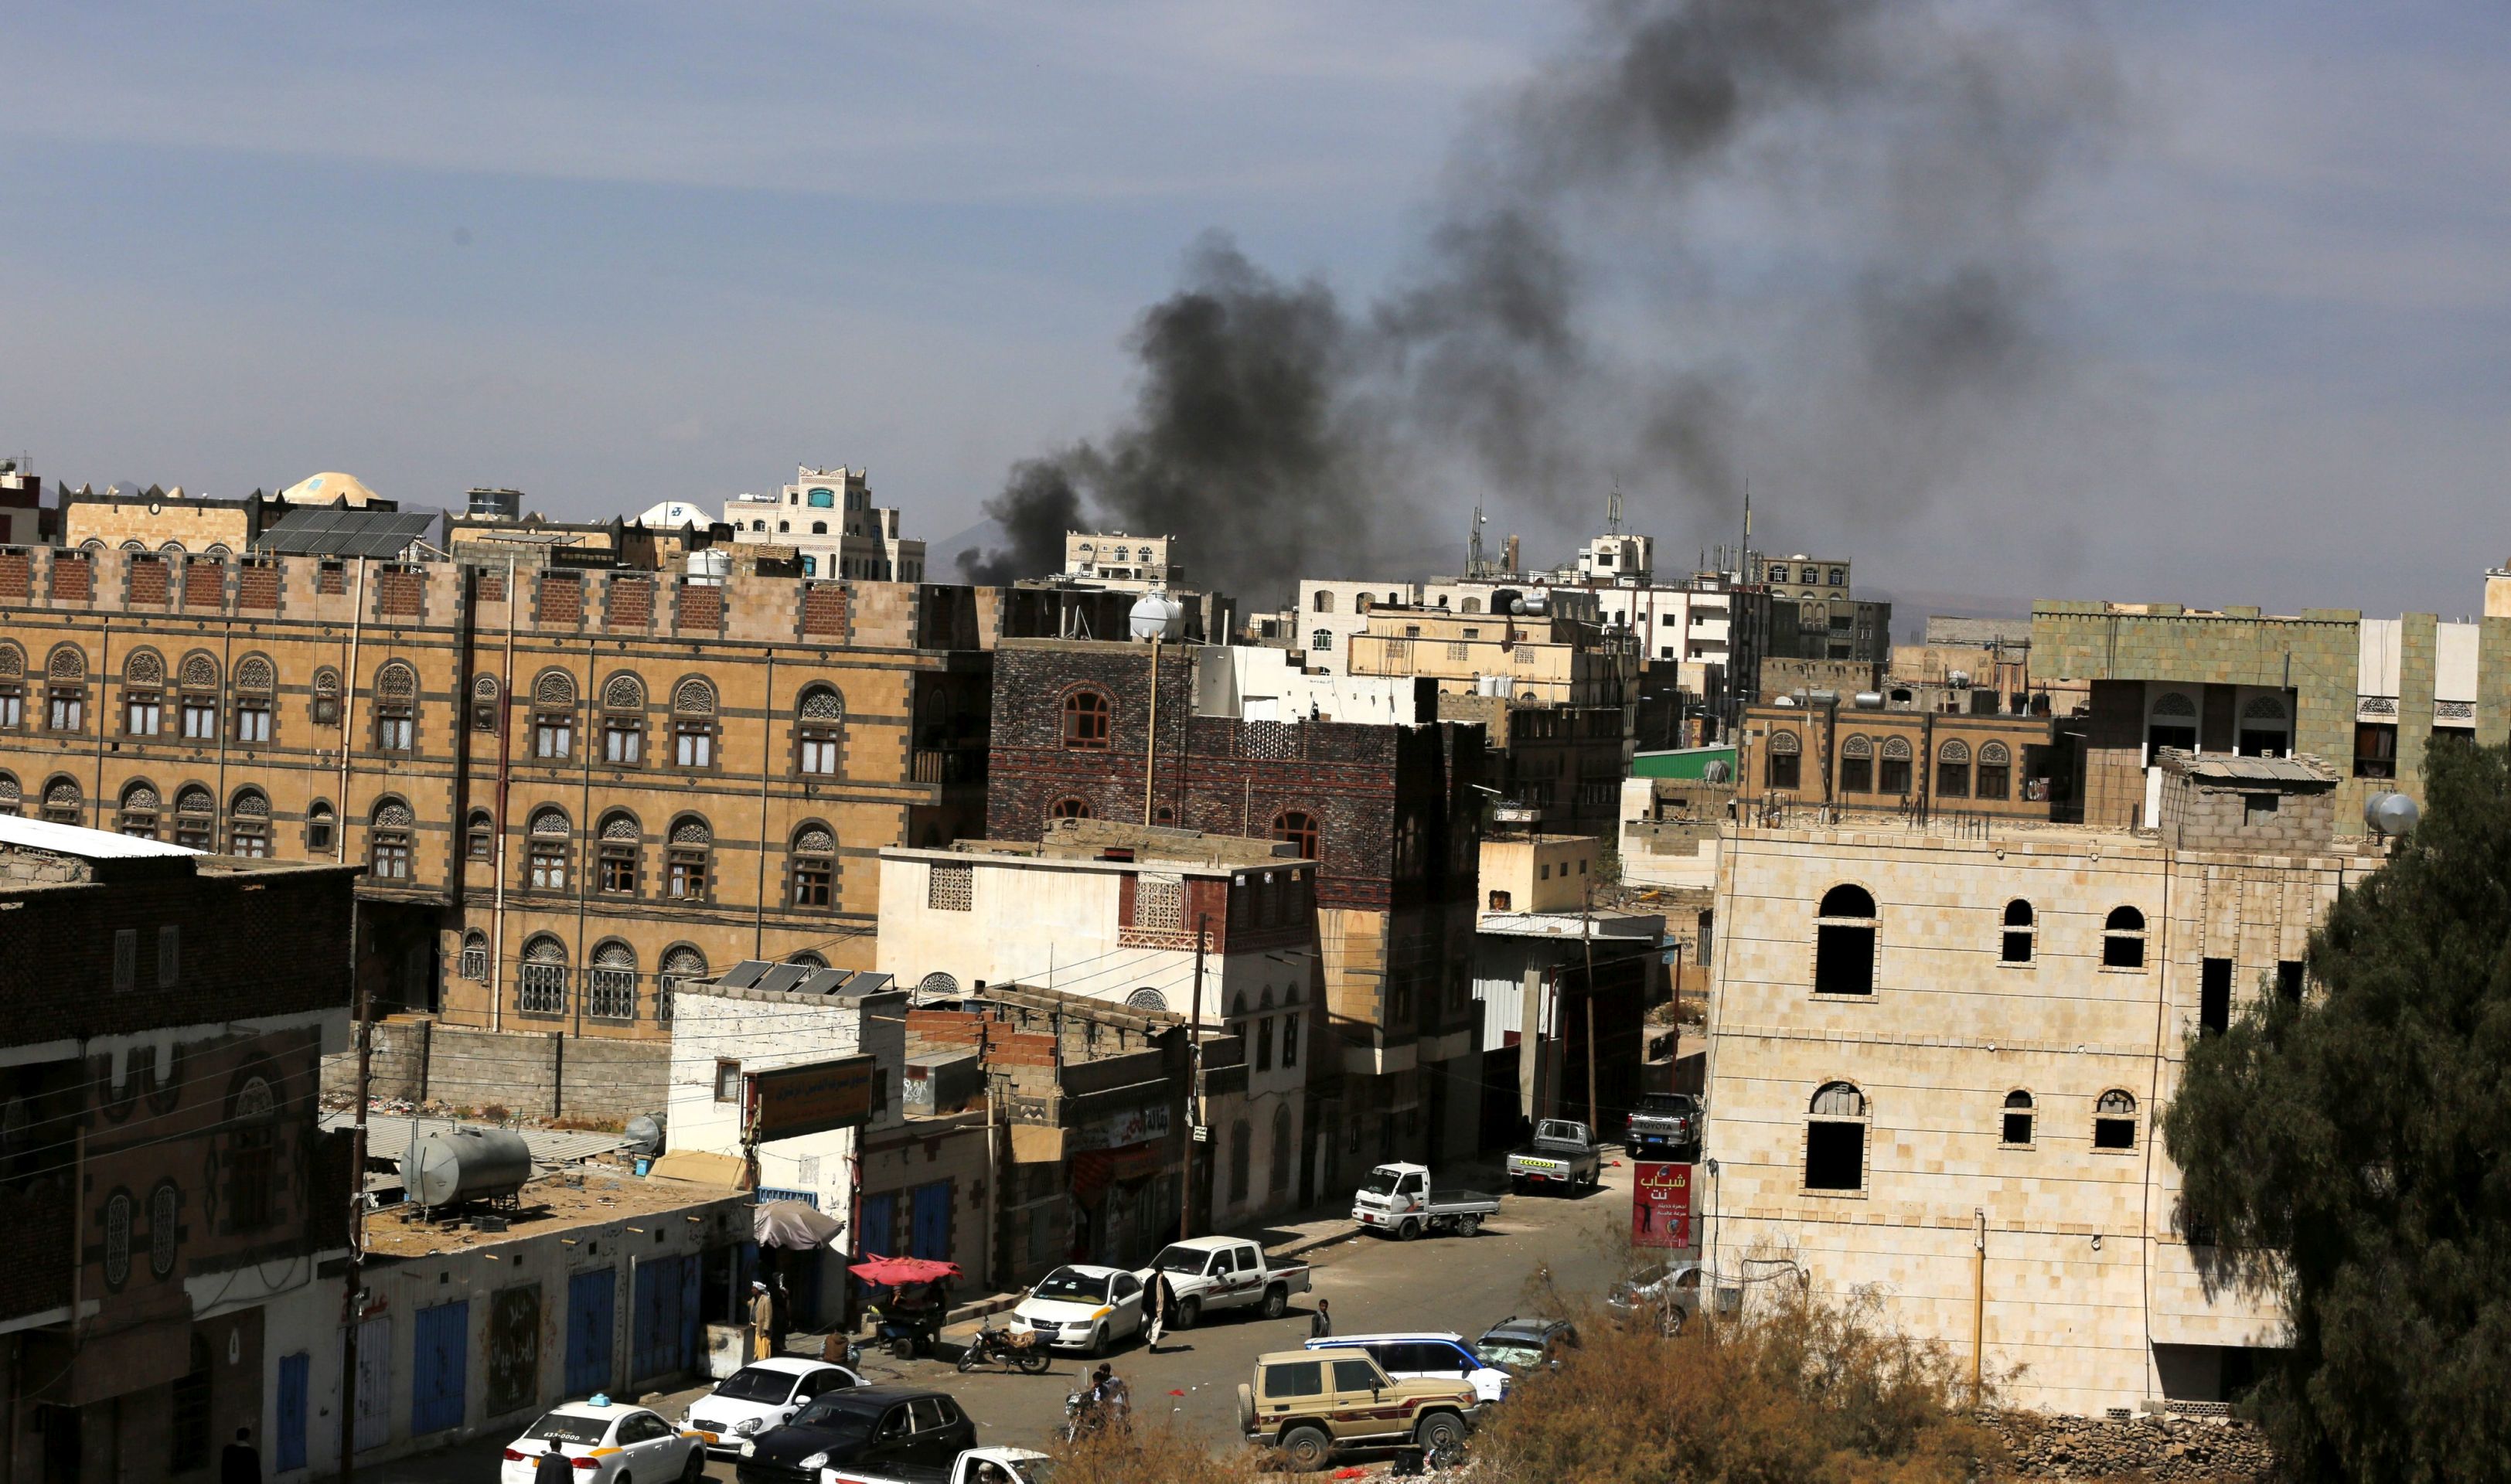 epa05741693 Black smoke billows above a neighborhood following an alleged Saudi-led airstrike targeting a Houthi-held position in Sana'a, Yemen, 22 January 2017. According to reports, the Saudi-led military coalition intensified airstrikes against several positions across Yemen as UN special envoy for Yemen Ismail Ould Cheikh Ahmed tries to push ahead a peace process between the Saudi-backed Yemeni Government and the Houthi rebels in order to end a nearly two-year escalating conflict in the Arab country.  EPA/YAHYA ARHAB